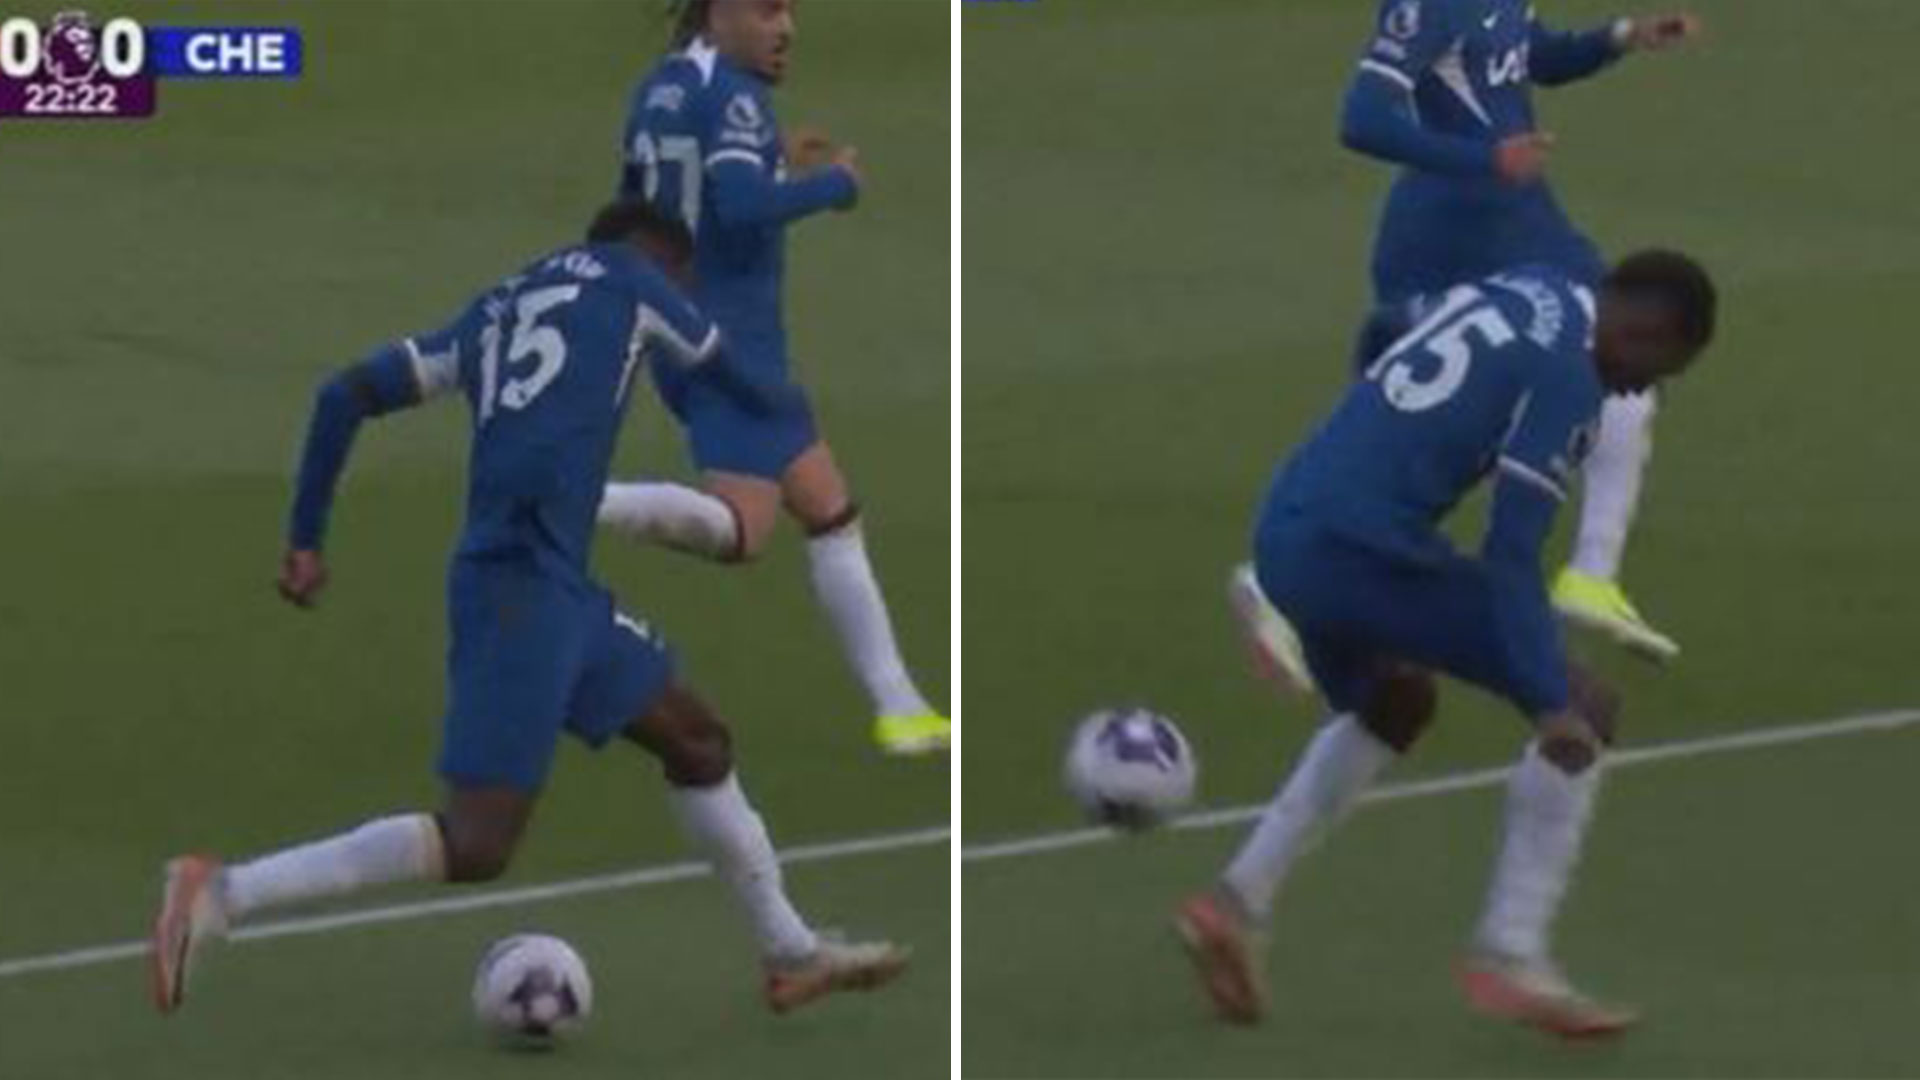 “Chelsea striker Nicolas Jackson leaves fans in stitches with epic self-tackle fail after stepover blunder” #Chelsea #NicolasJackson #selftacklefail #stepoverblunder #football humor